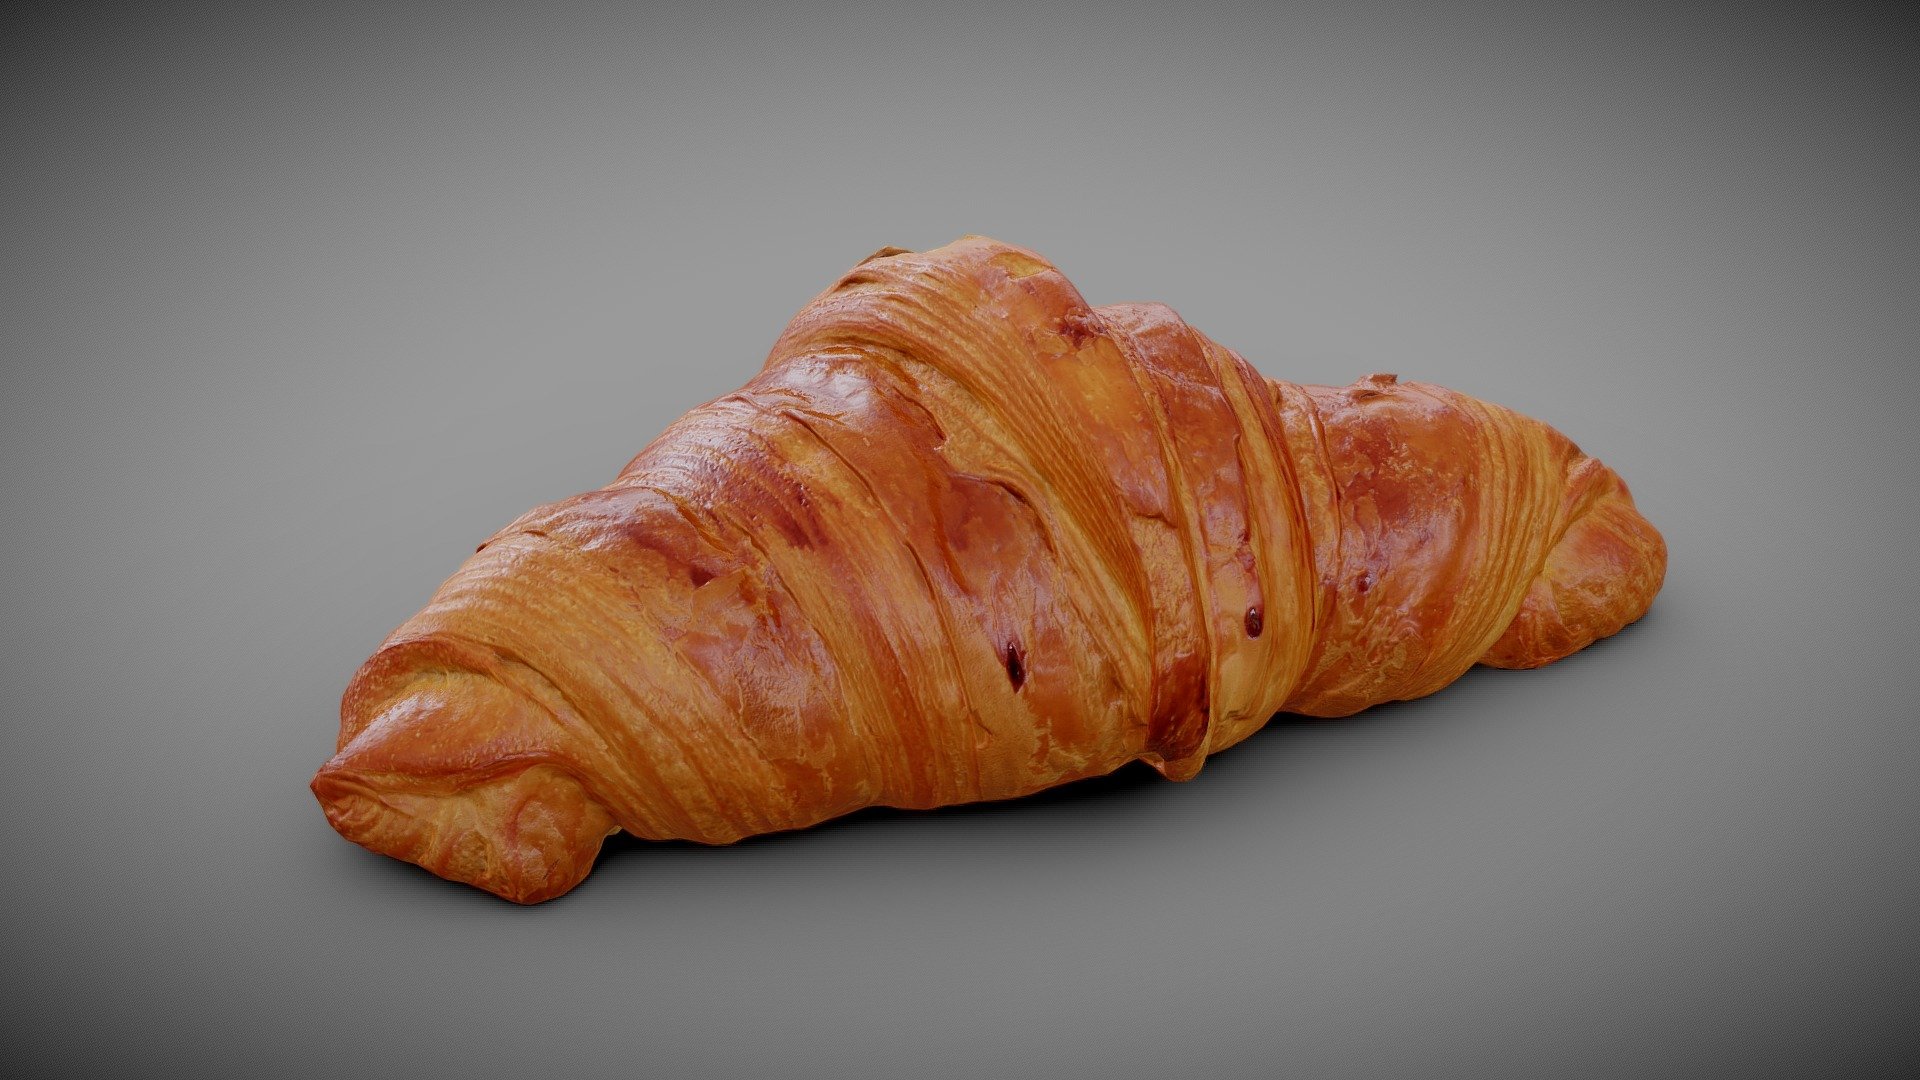 French Croissant

Also available in this pack 7 pastries with a 57% discount

Made with Metashape, Blender and Subtance painter

Photos taken with a “Sony A7II + 105mm f/2.8 DG DN Macro Art